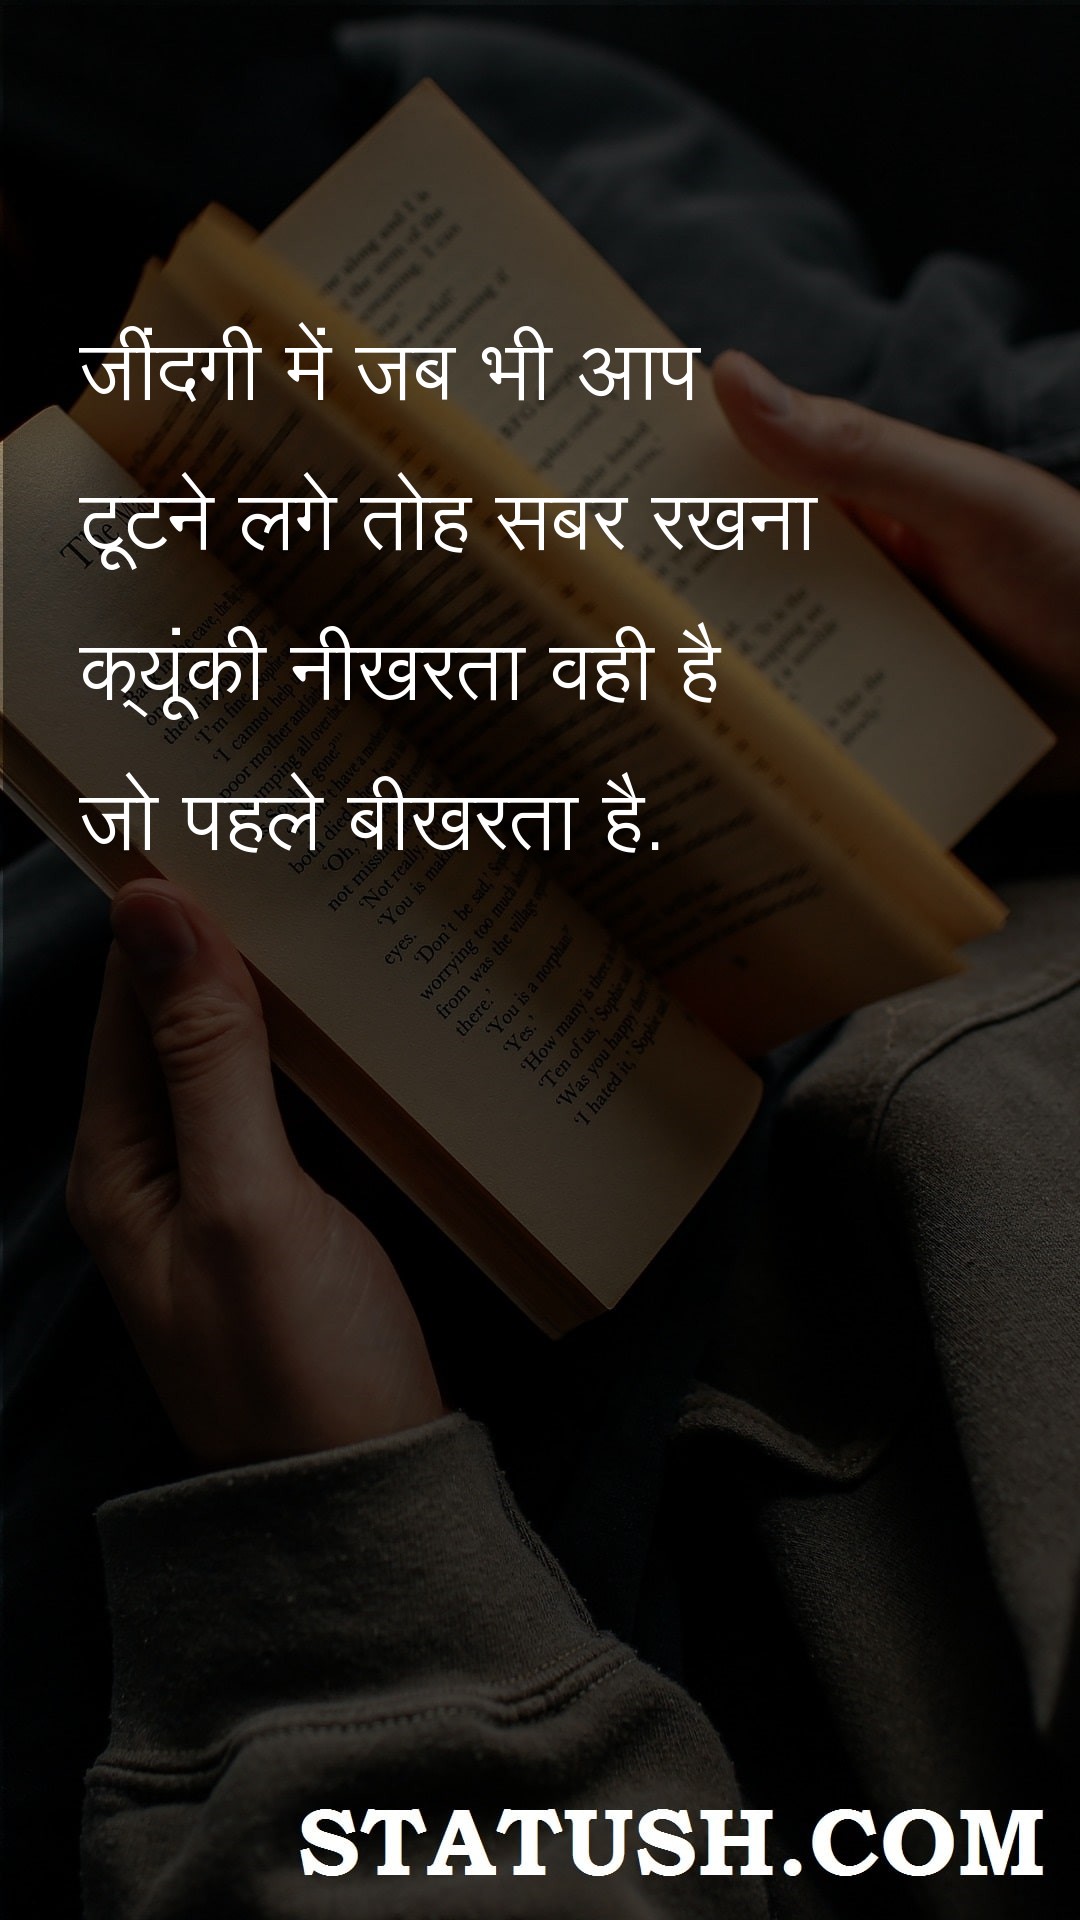 Whenever you break up in life - Hindi Quotes at statush.com